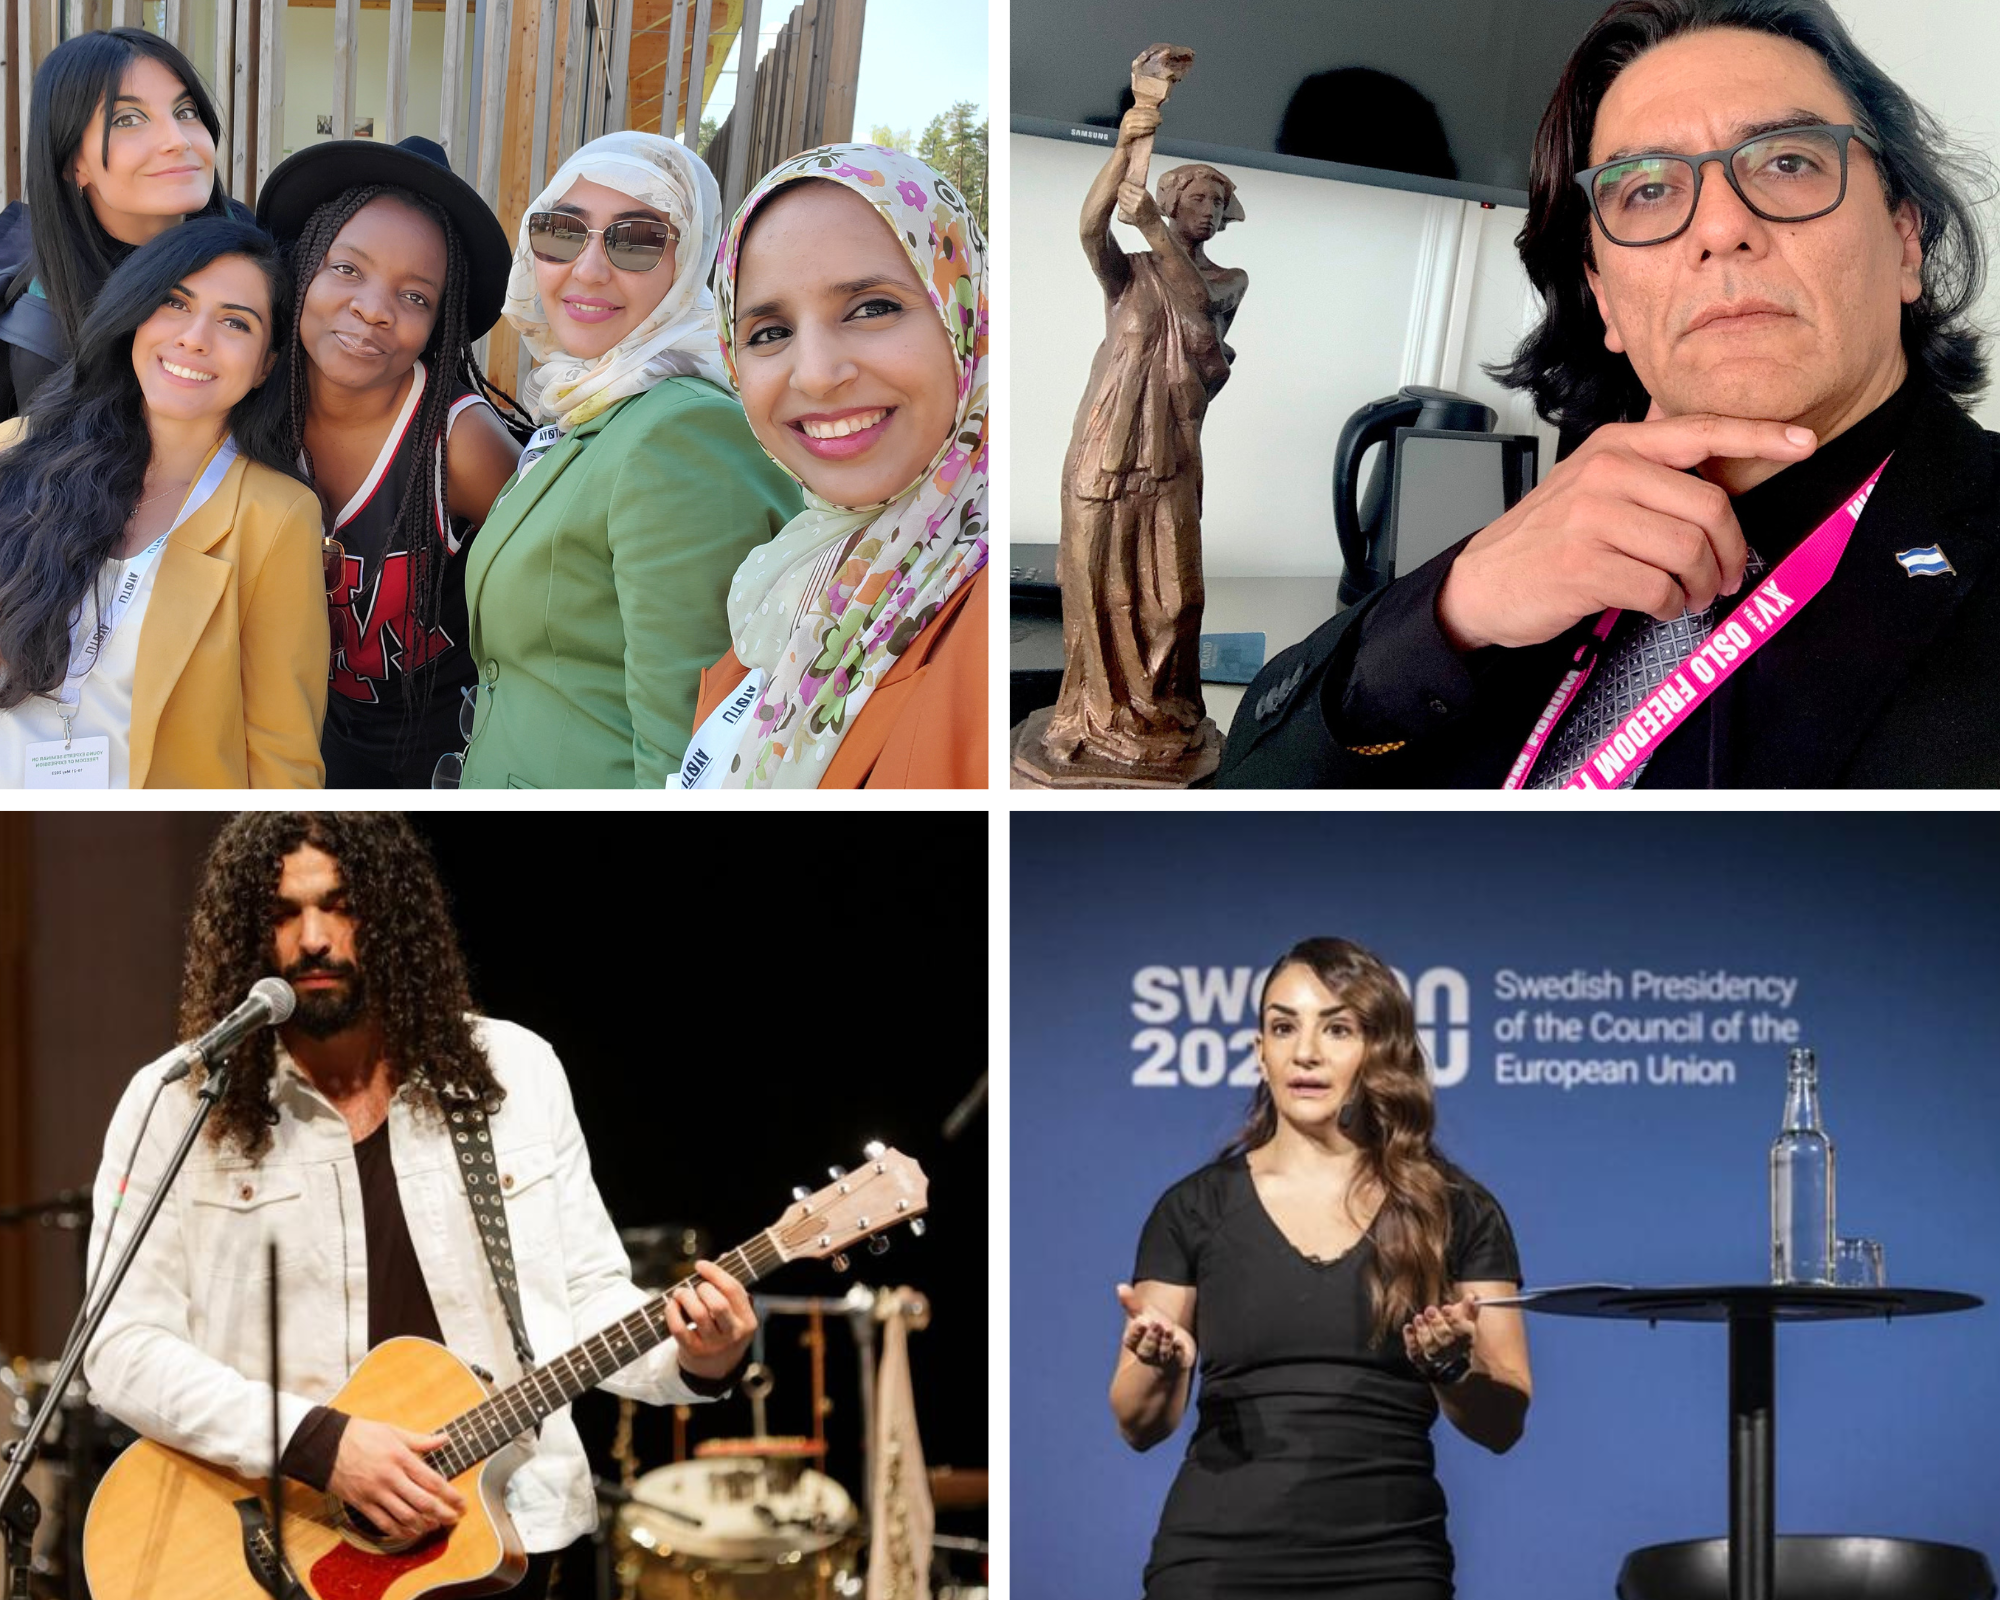 Some of 2023’s highlights in photos. Top left: Atefe Asadi and Hayat Al-Sharif, together with other participants at the WEXFO Youth. Photo: Private; Pedro Molina with the 2023 Václav Havel International Prize for Creative Dissent. Photo: Private. Bottom left: Ramy Essam. Photo: H.Garat JB. Gurliat. Parisa Liljestrand, Swedish Minister of Culture, Photo source: Swedish Presidency of the Council of the European Union.